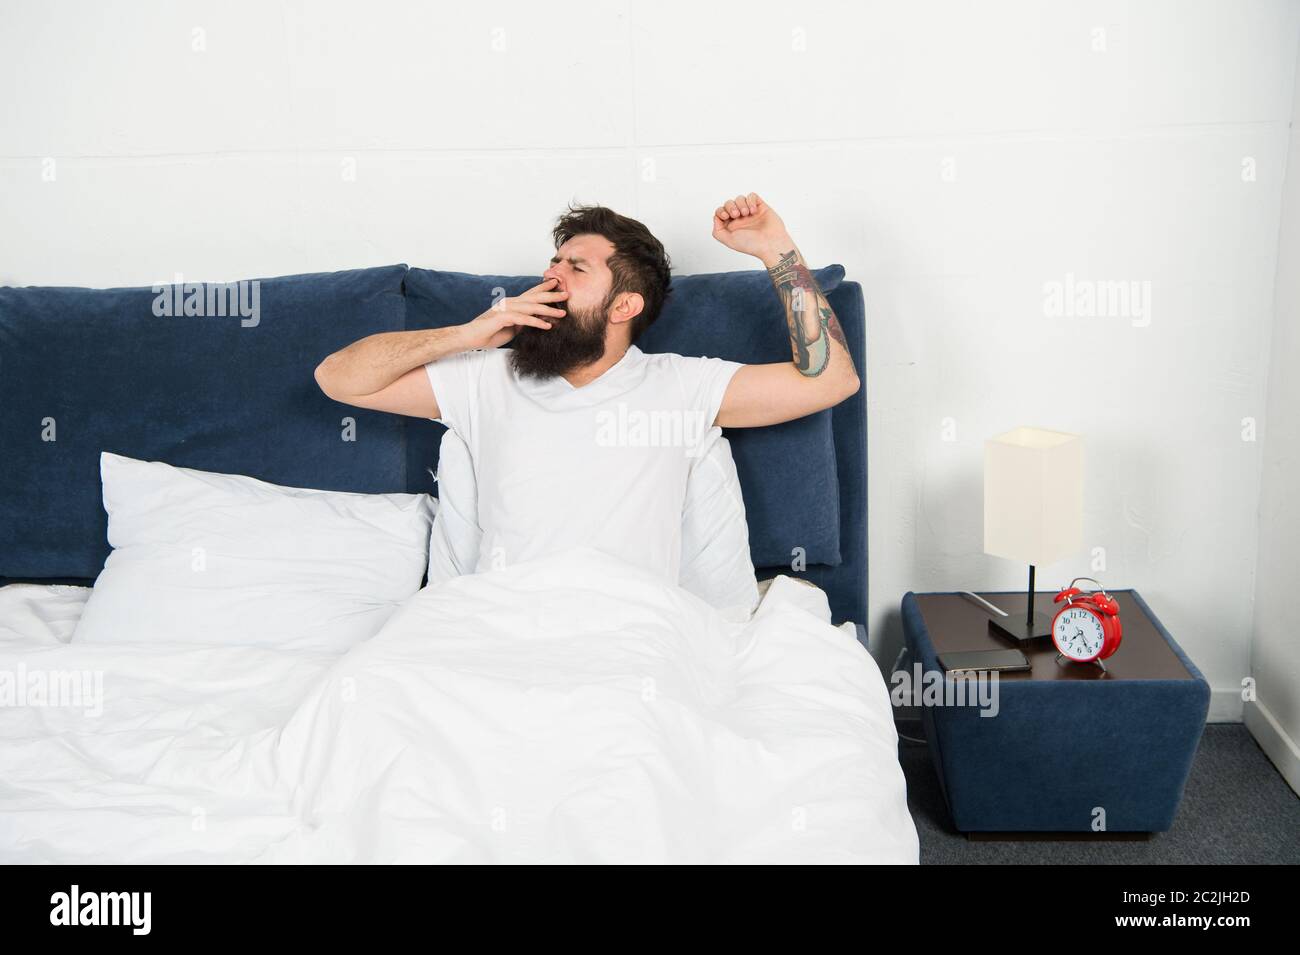 Bed is so comfortable in morning. Hipster give long yawns in bed. Bearded man stay in bed after wakeup. Bed time routine. Bedroom. Getting the rest your body needs. Stock Photo